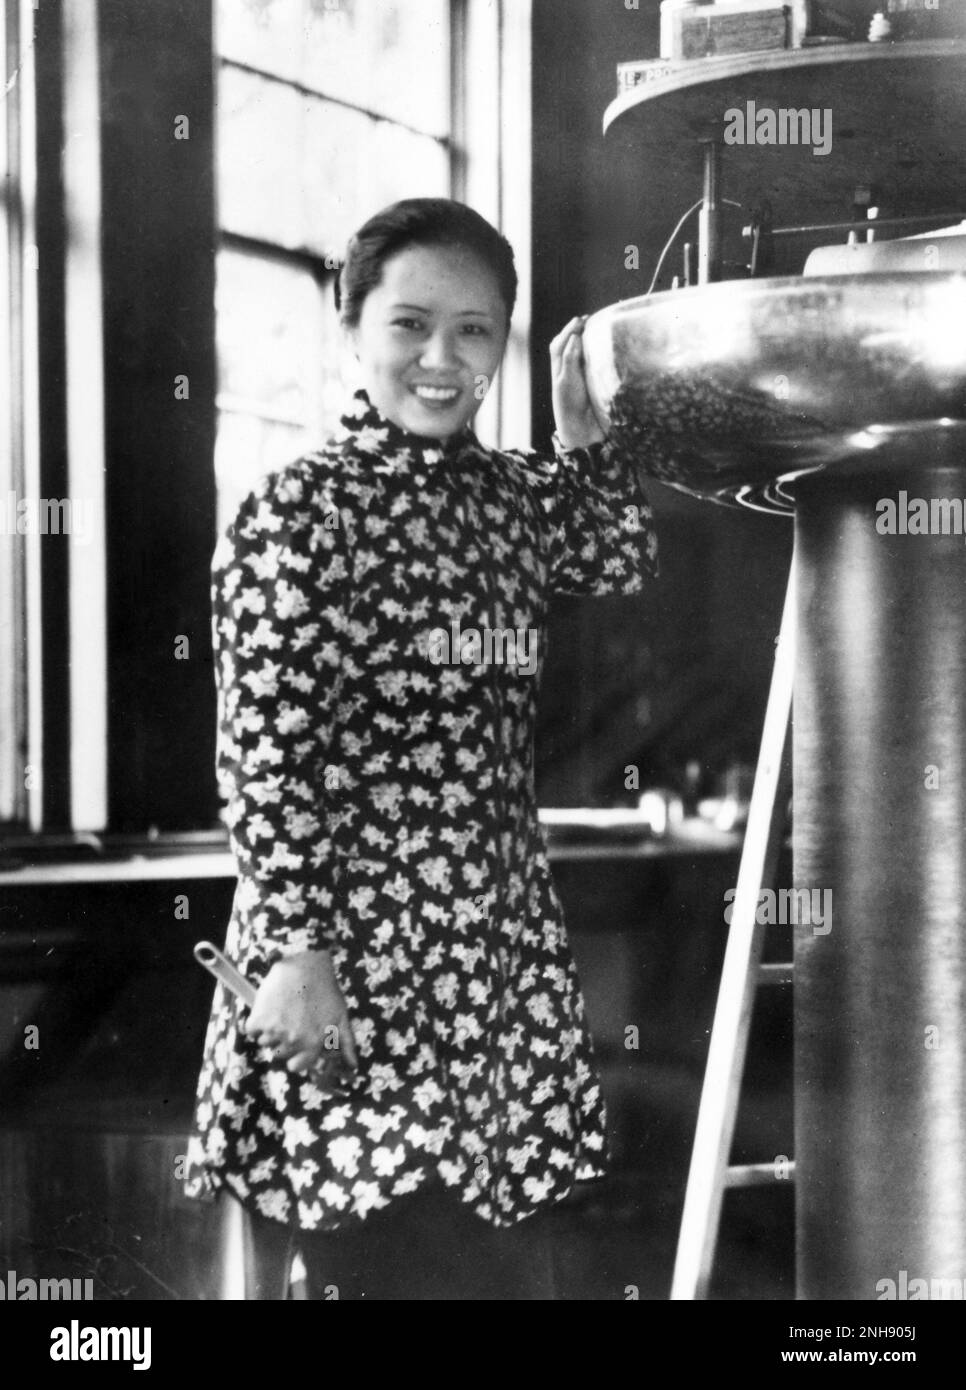 Chien-shiung Wu (1912-1997) assembling an electrostatic generator at Smith College Physics Laboratory, circa 1942. Wu was a Chinese-American physicist who worked on the Manhattan Project, helping to develop the process for separating uranium metal into the U-235 and U-238 isotopes by gaseous diffusion. In 1956, Wu and Tsung-Dao Lee experimentally confirmed a theory that parity is violated during weak radioactive decay, overturning many basic assumptions of particle physics. Stock Photo